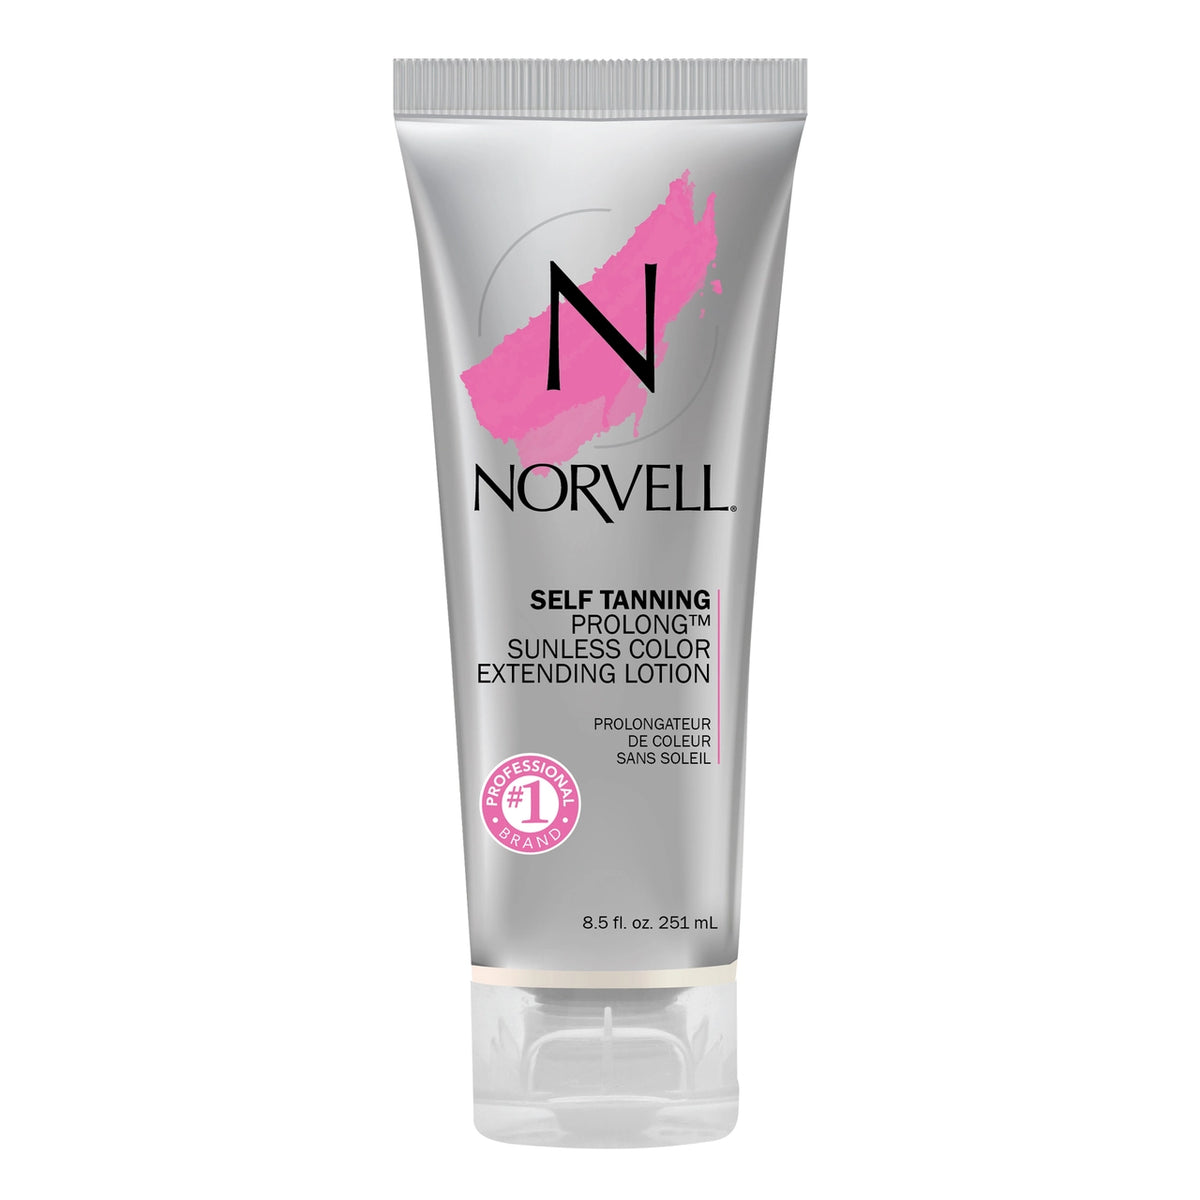 Norvell Self Tanning Prolong Lotion